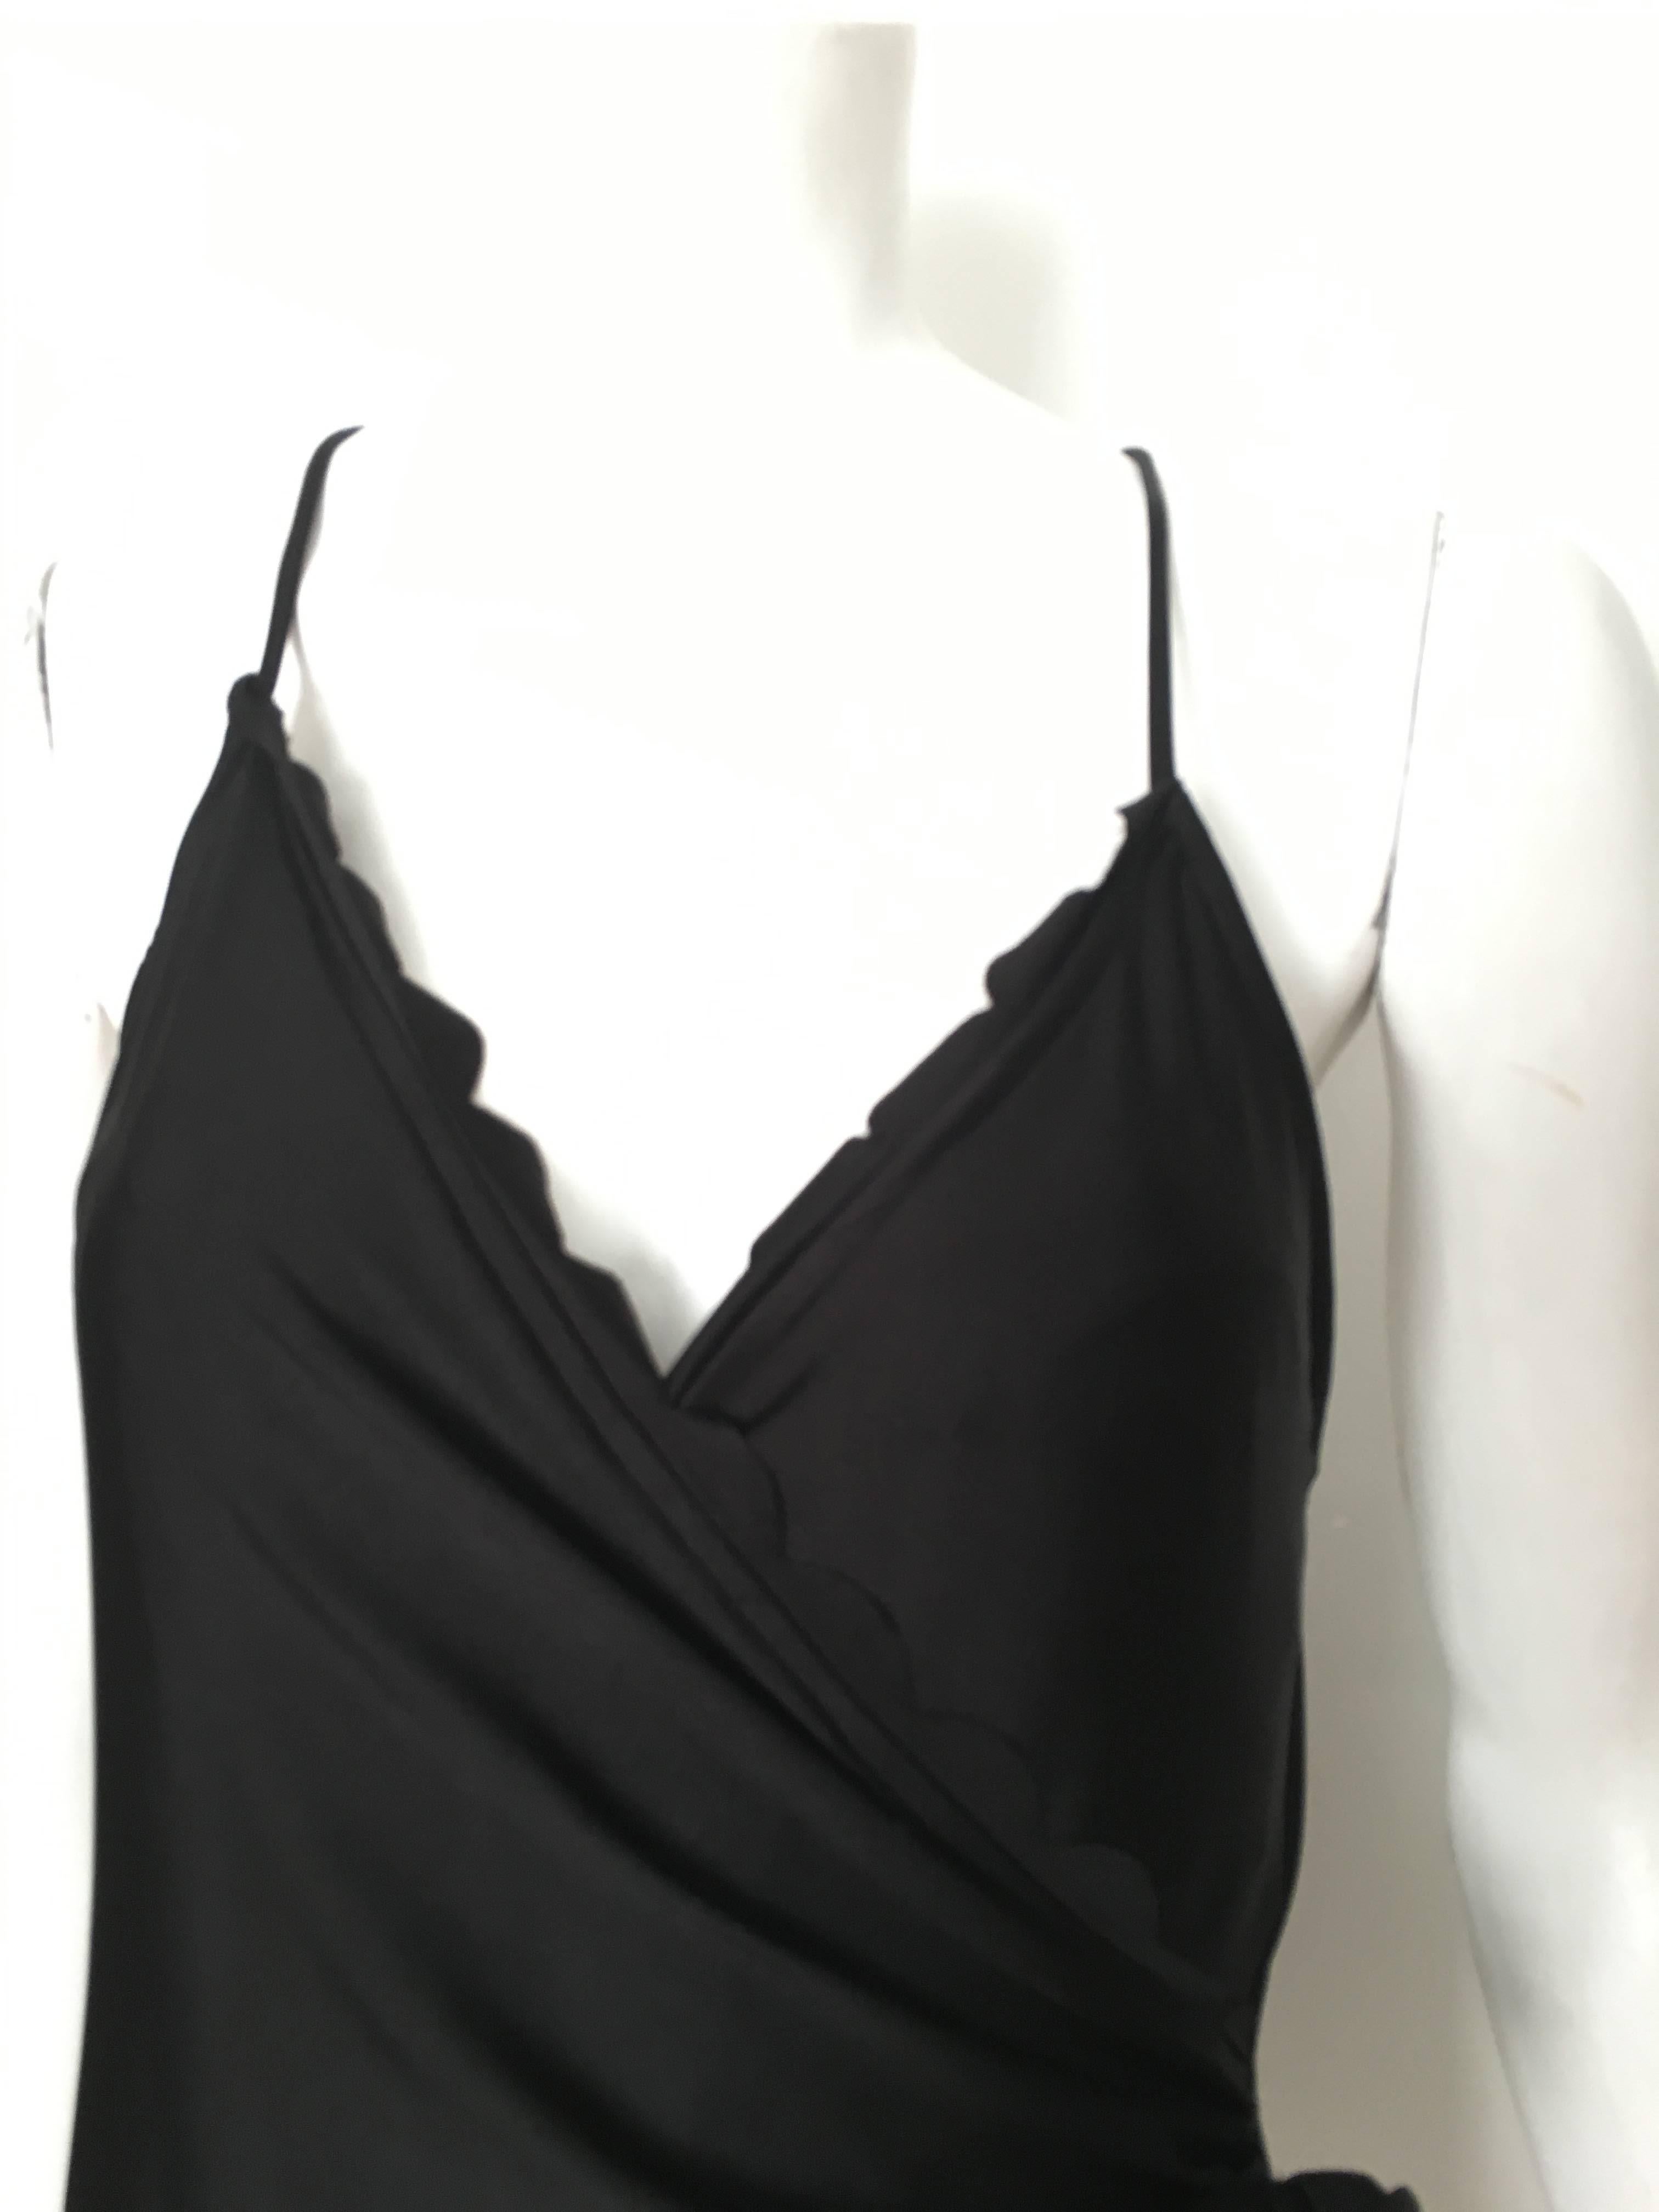 Oscar de la Renta 1990s black swimsuit crisscross back and flower on side is marked size 14 but fits more like a size 8/10. This is the perfect swimsuit for the woman that vacations in St. Tropez or St. Barts. Use your vintage Hermes large scarf as